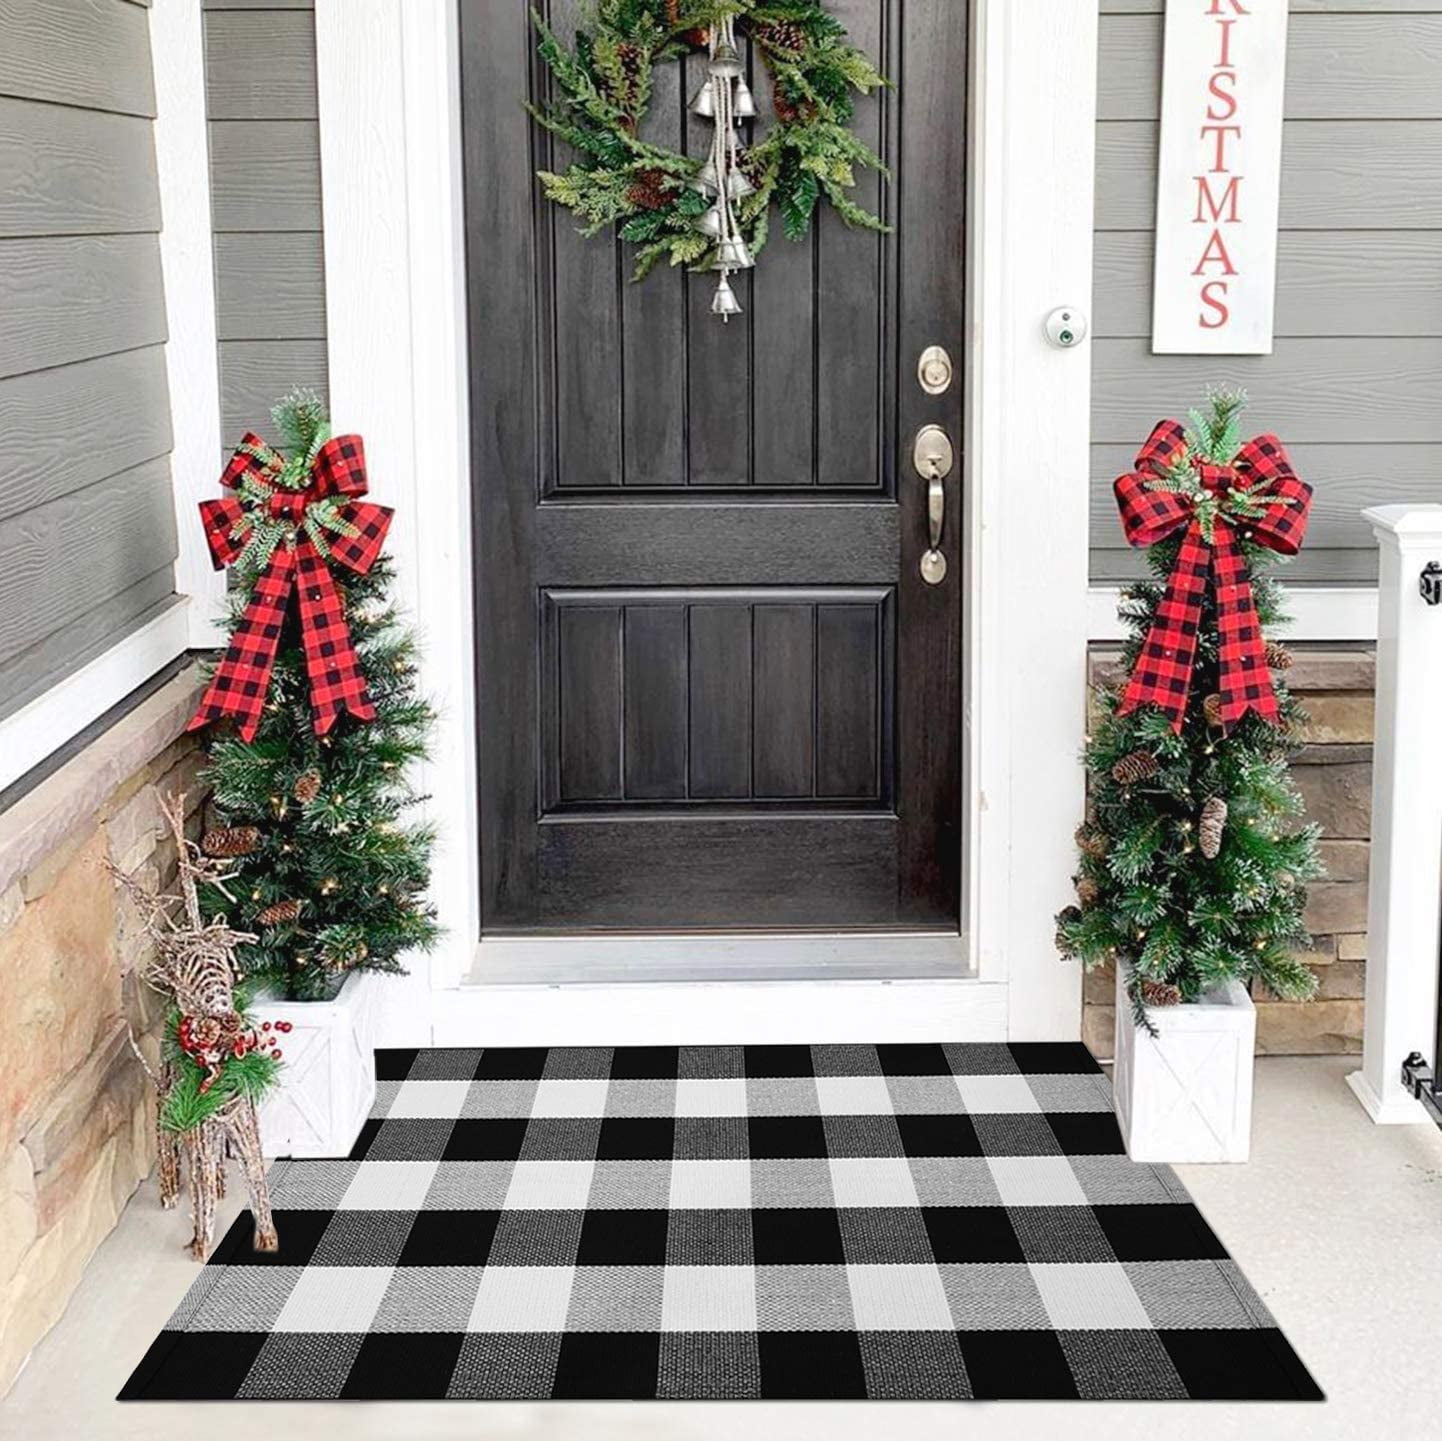 Debao Buffalo Plaid Outdoor Rug, 3x5 Blue and White Checkered Door Mat,  Cotton Woven Washable Welcome Mat for Kitchen, Farmhouse Entryway Carpet